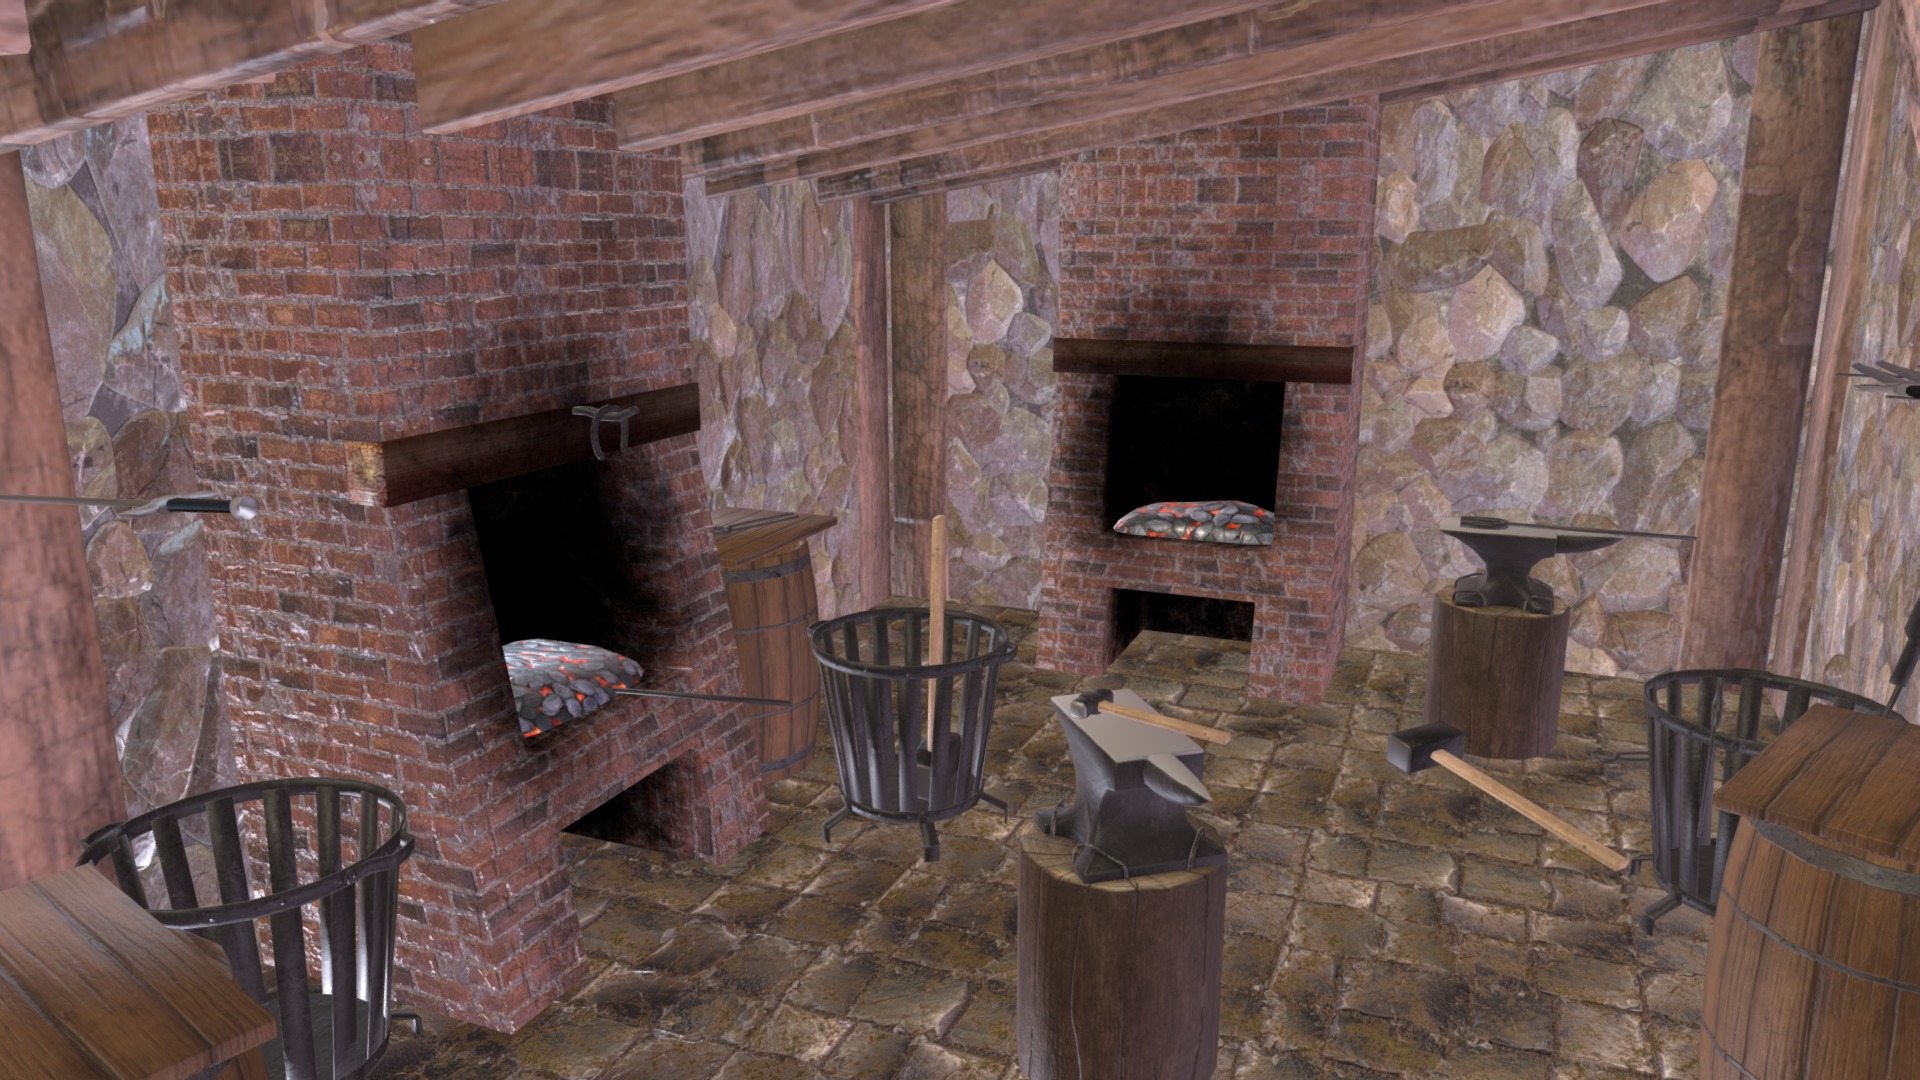 3D model Smithy – building and props - This is a 3D model of the Smithy - building and props. The 3D model is about a brick oven in a stone room.